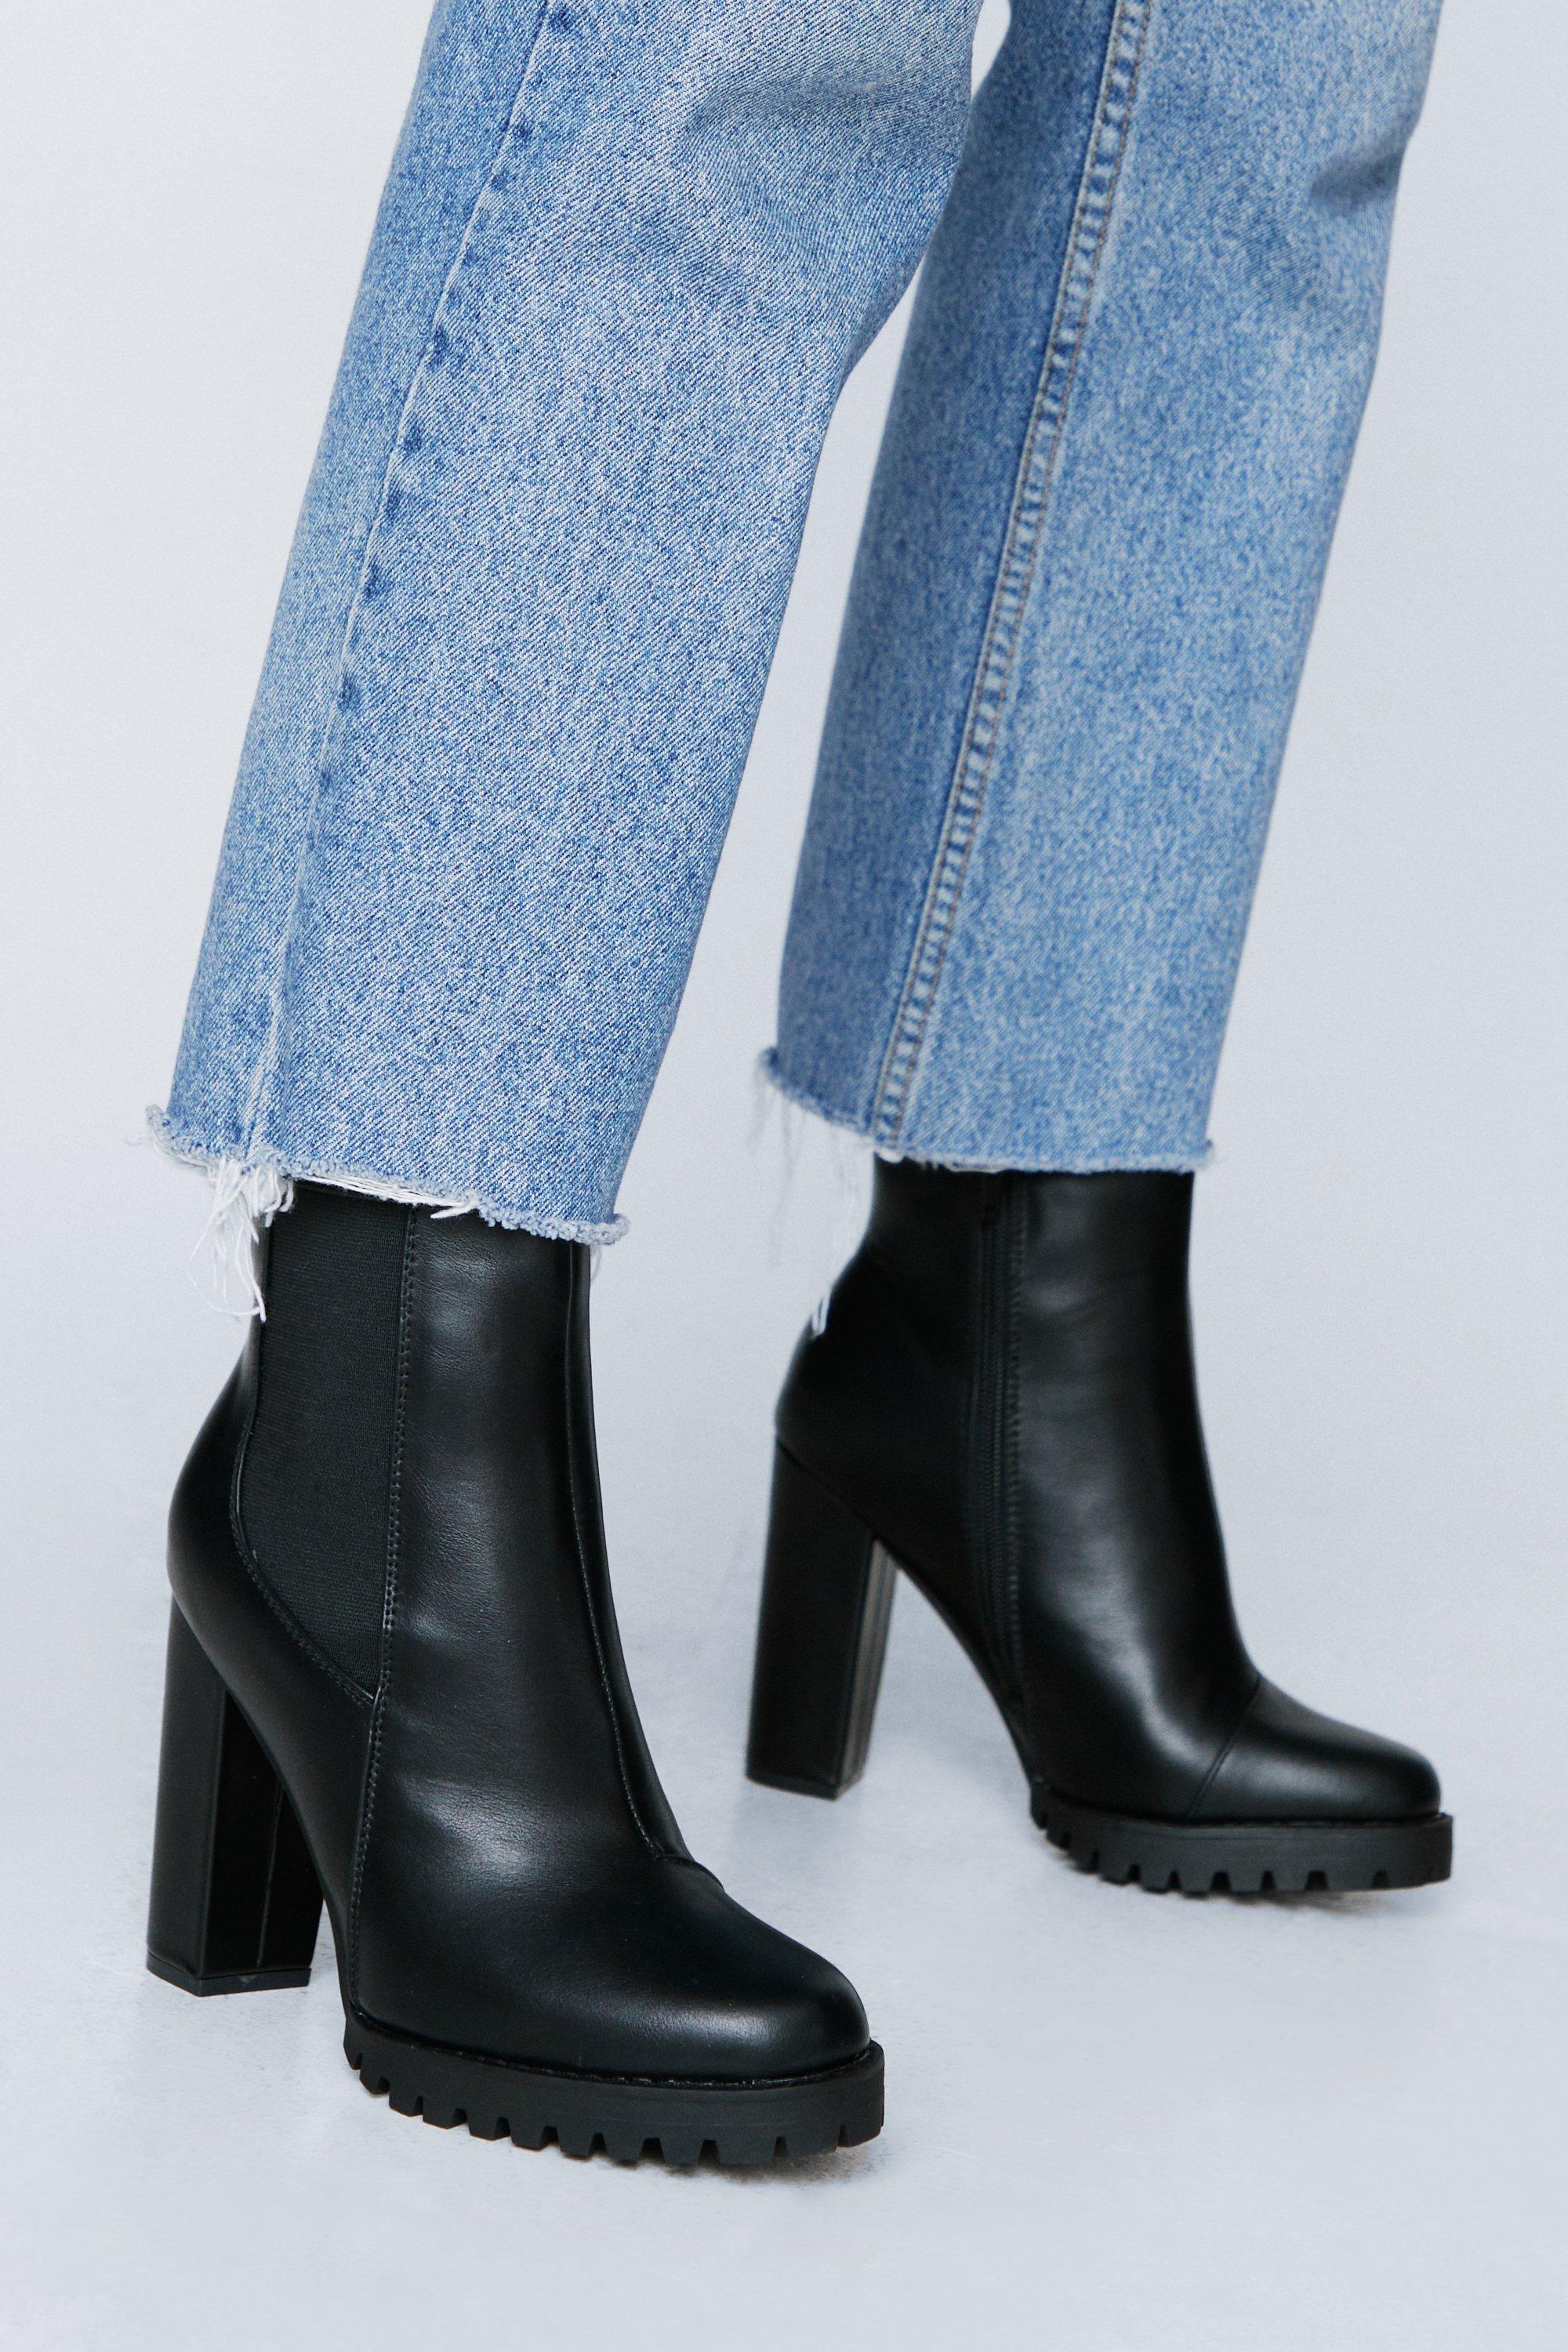 Black Leather Ankle Boots Chunky Heel | vlr.eng.br